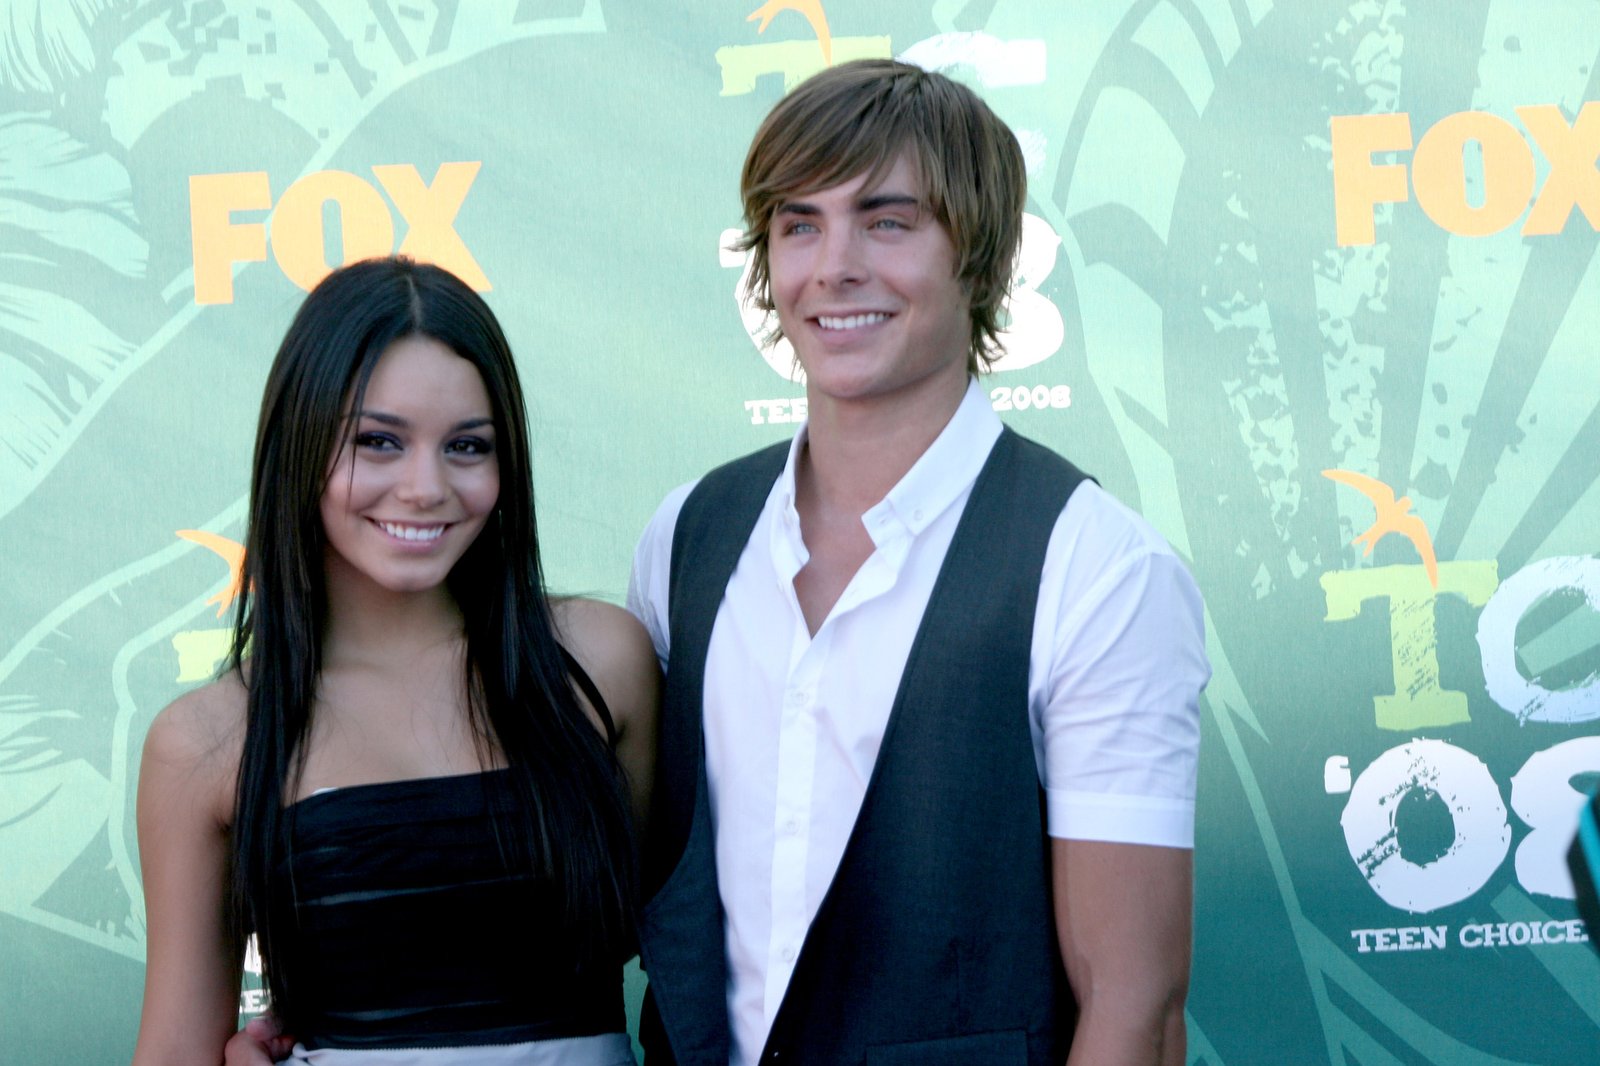 Vanessa Hudgens & Zac Efron  arriving at the Teen Choice Awards 2008 at the Universal Ampitheater at Universal Studios in  Los Angeles, CA
August 3, 2008
©2008 Kathy Hutchins / Hutchins Photo
